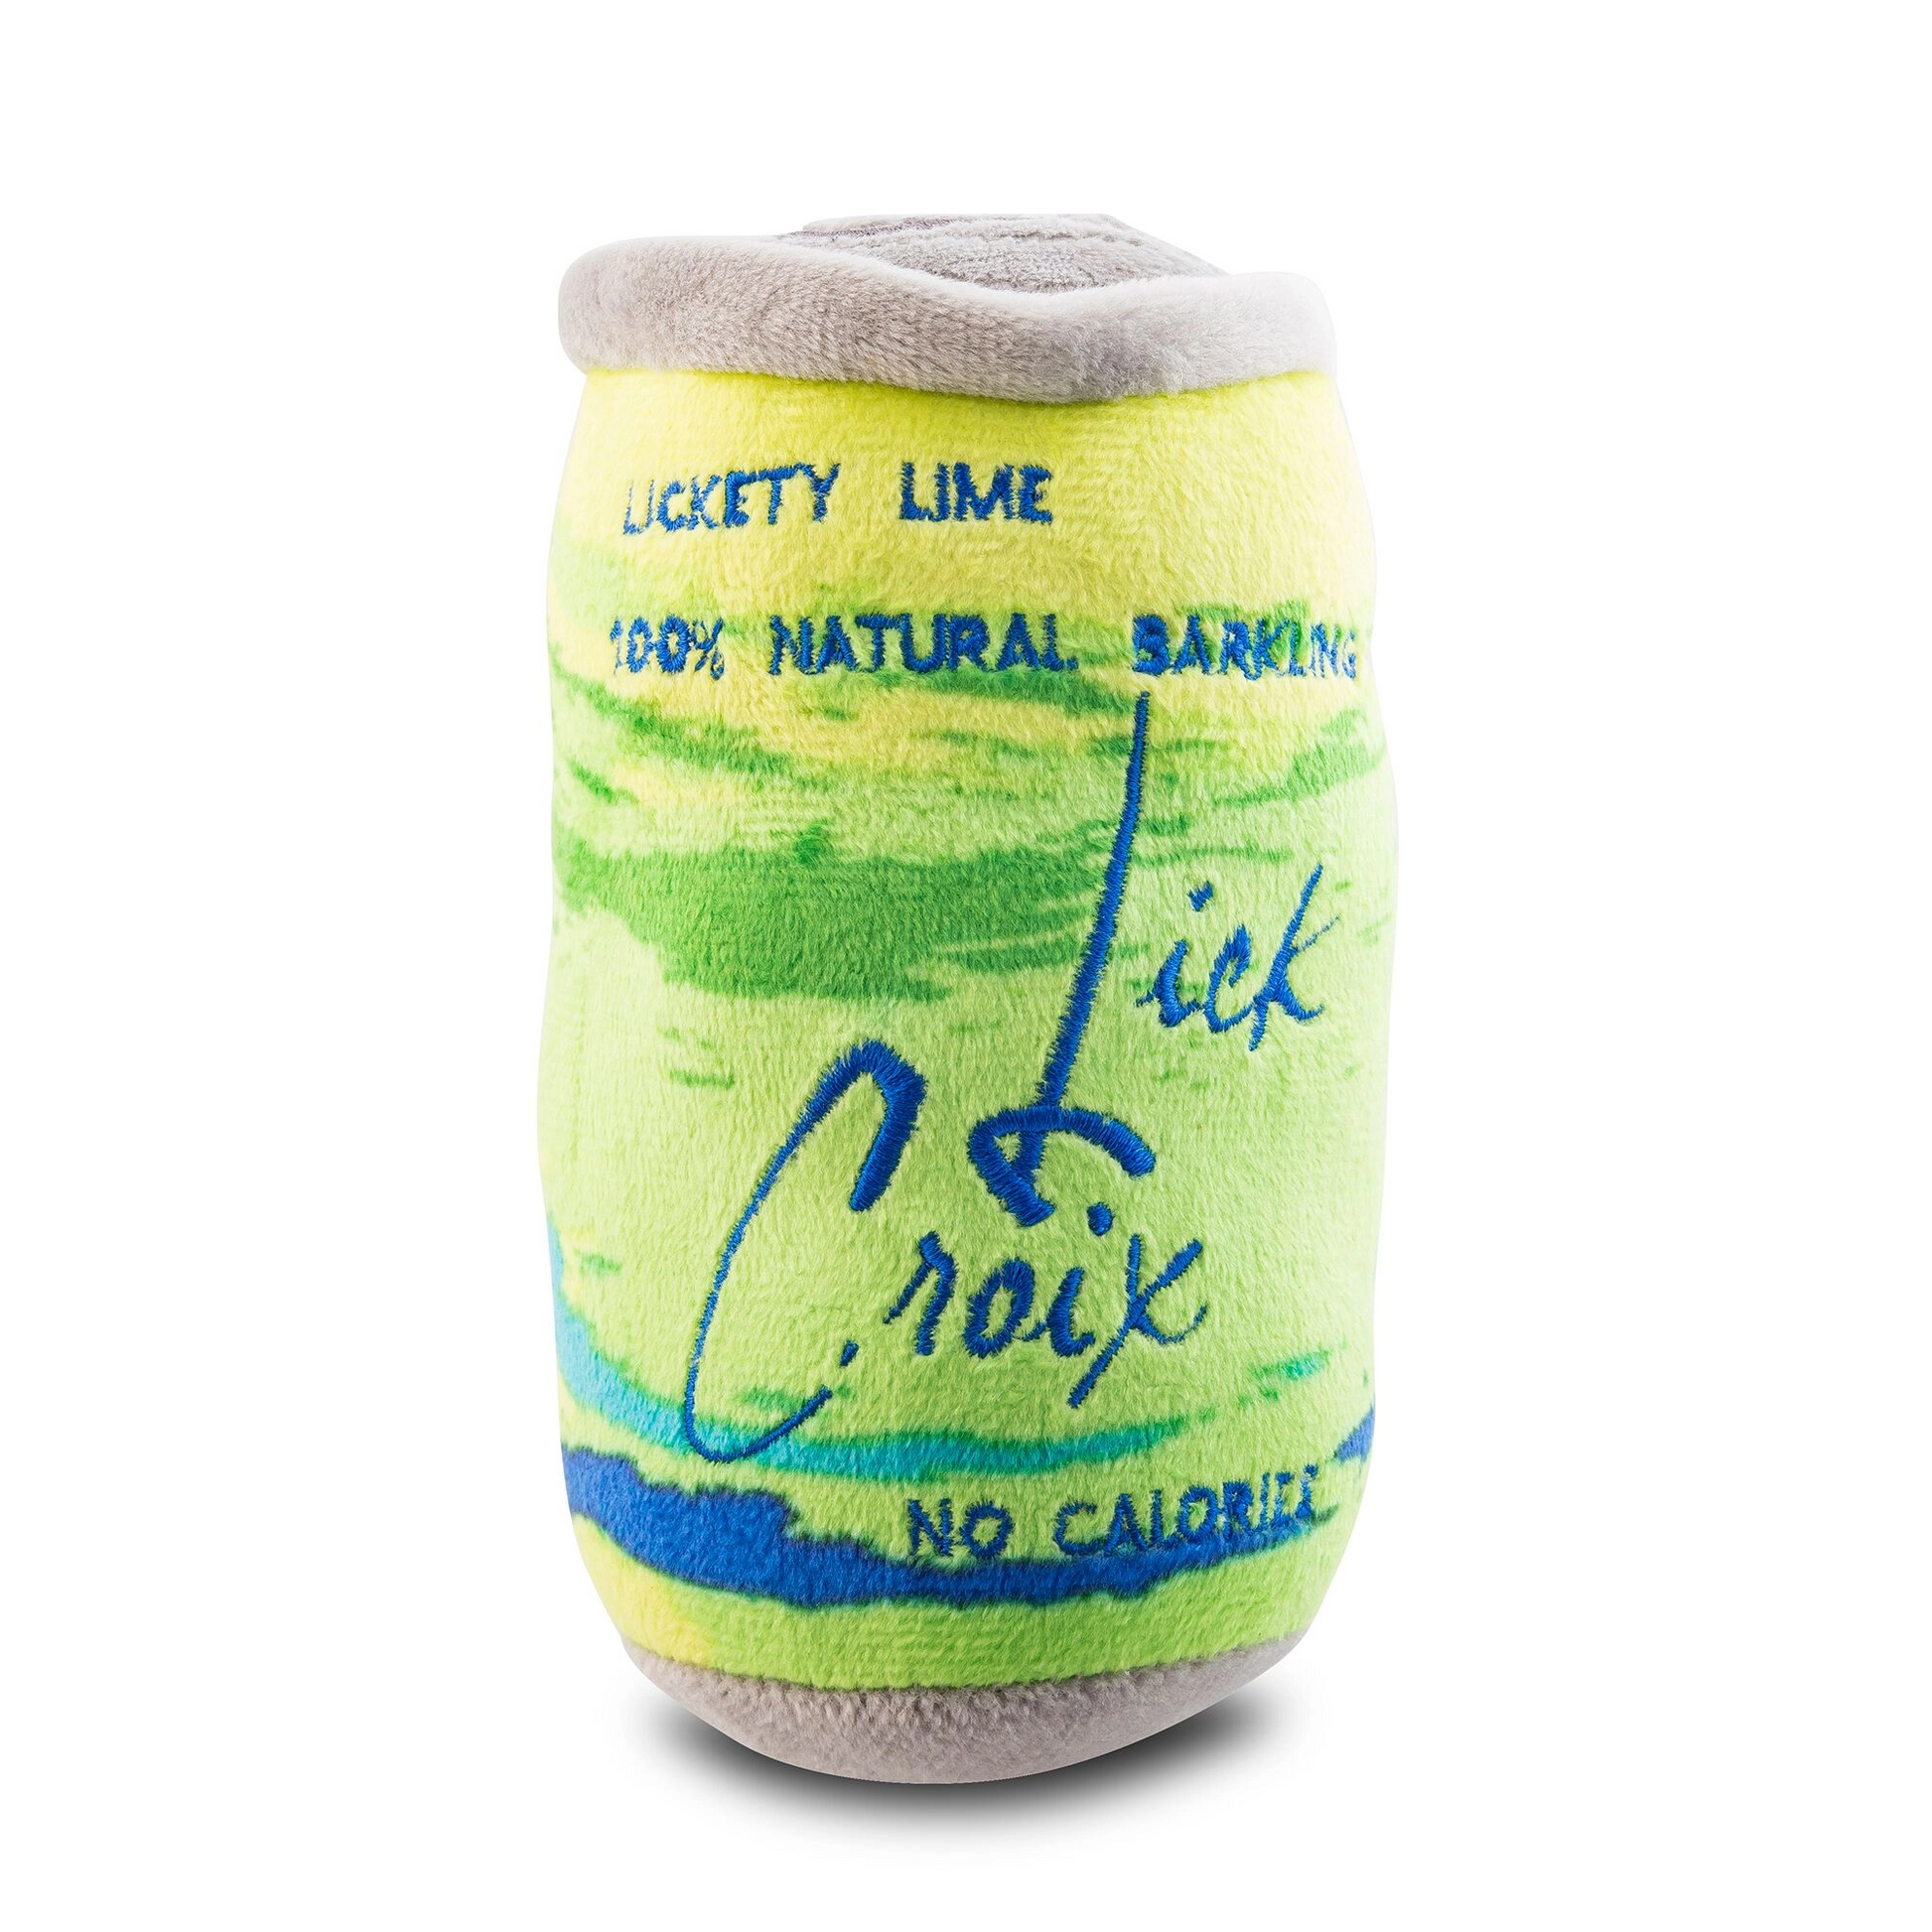 Detail SOUTH HOUS LaCroix Sparkling Water LickCroix Barkling Water Dog Pooch Toy Chewy Lickety Lime